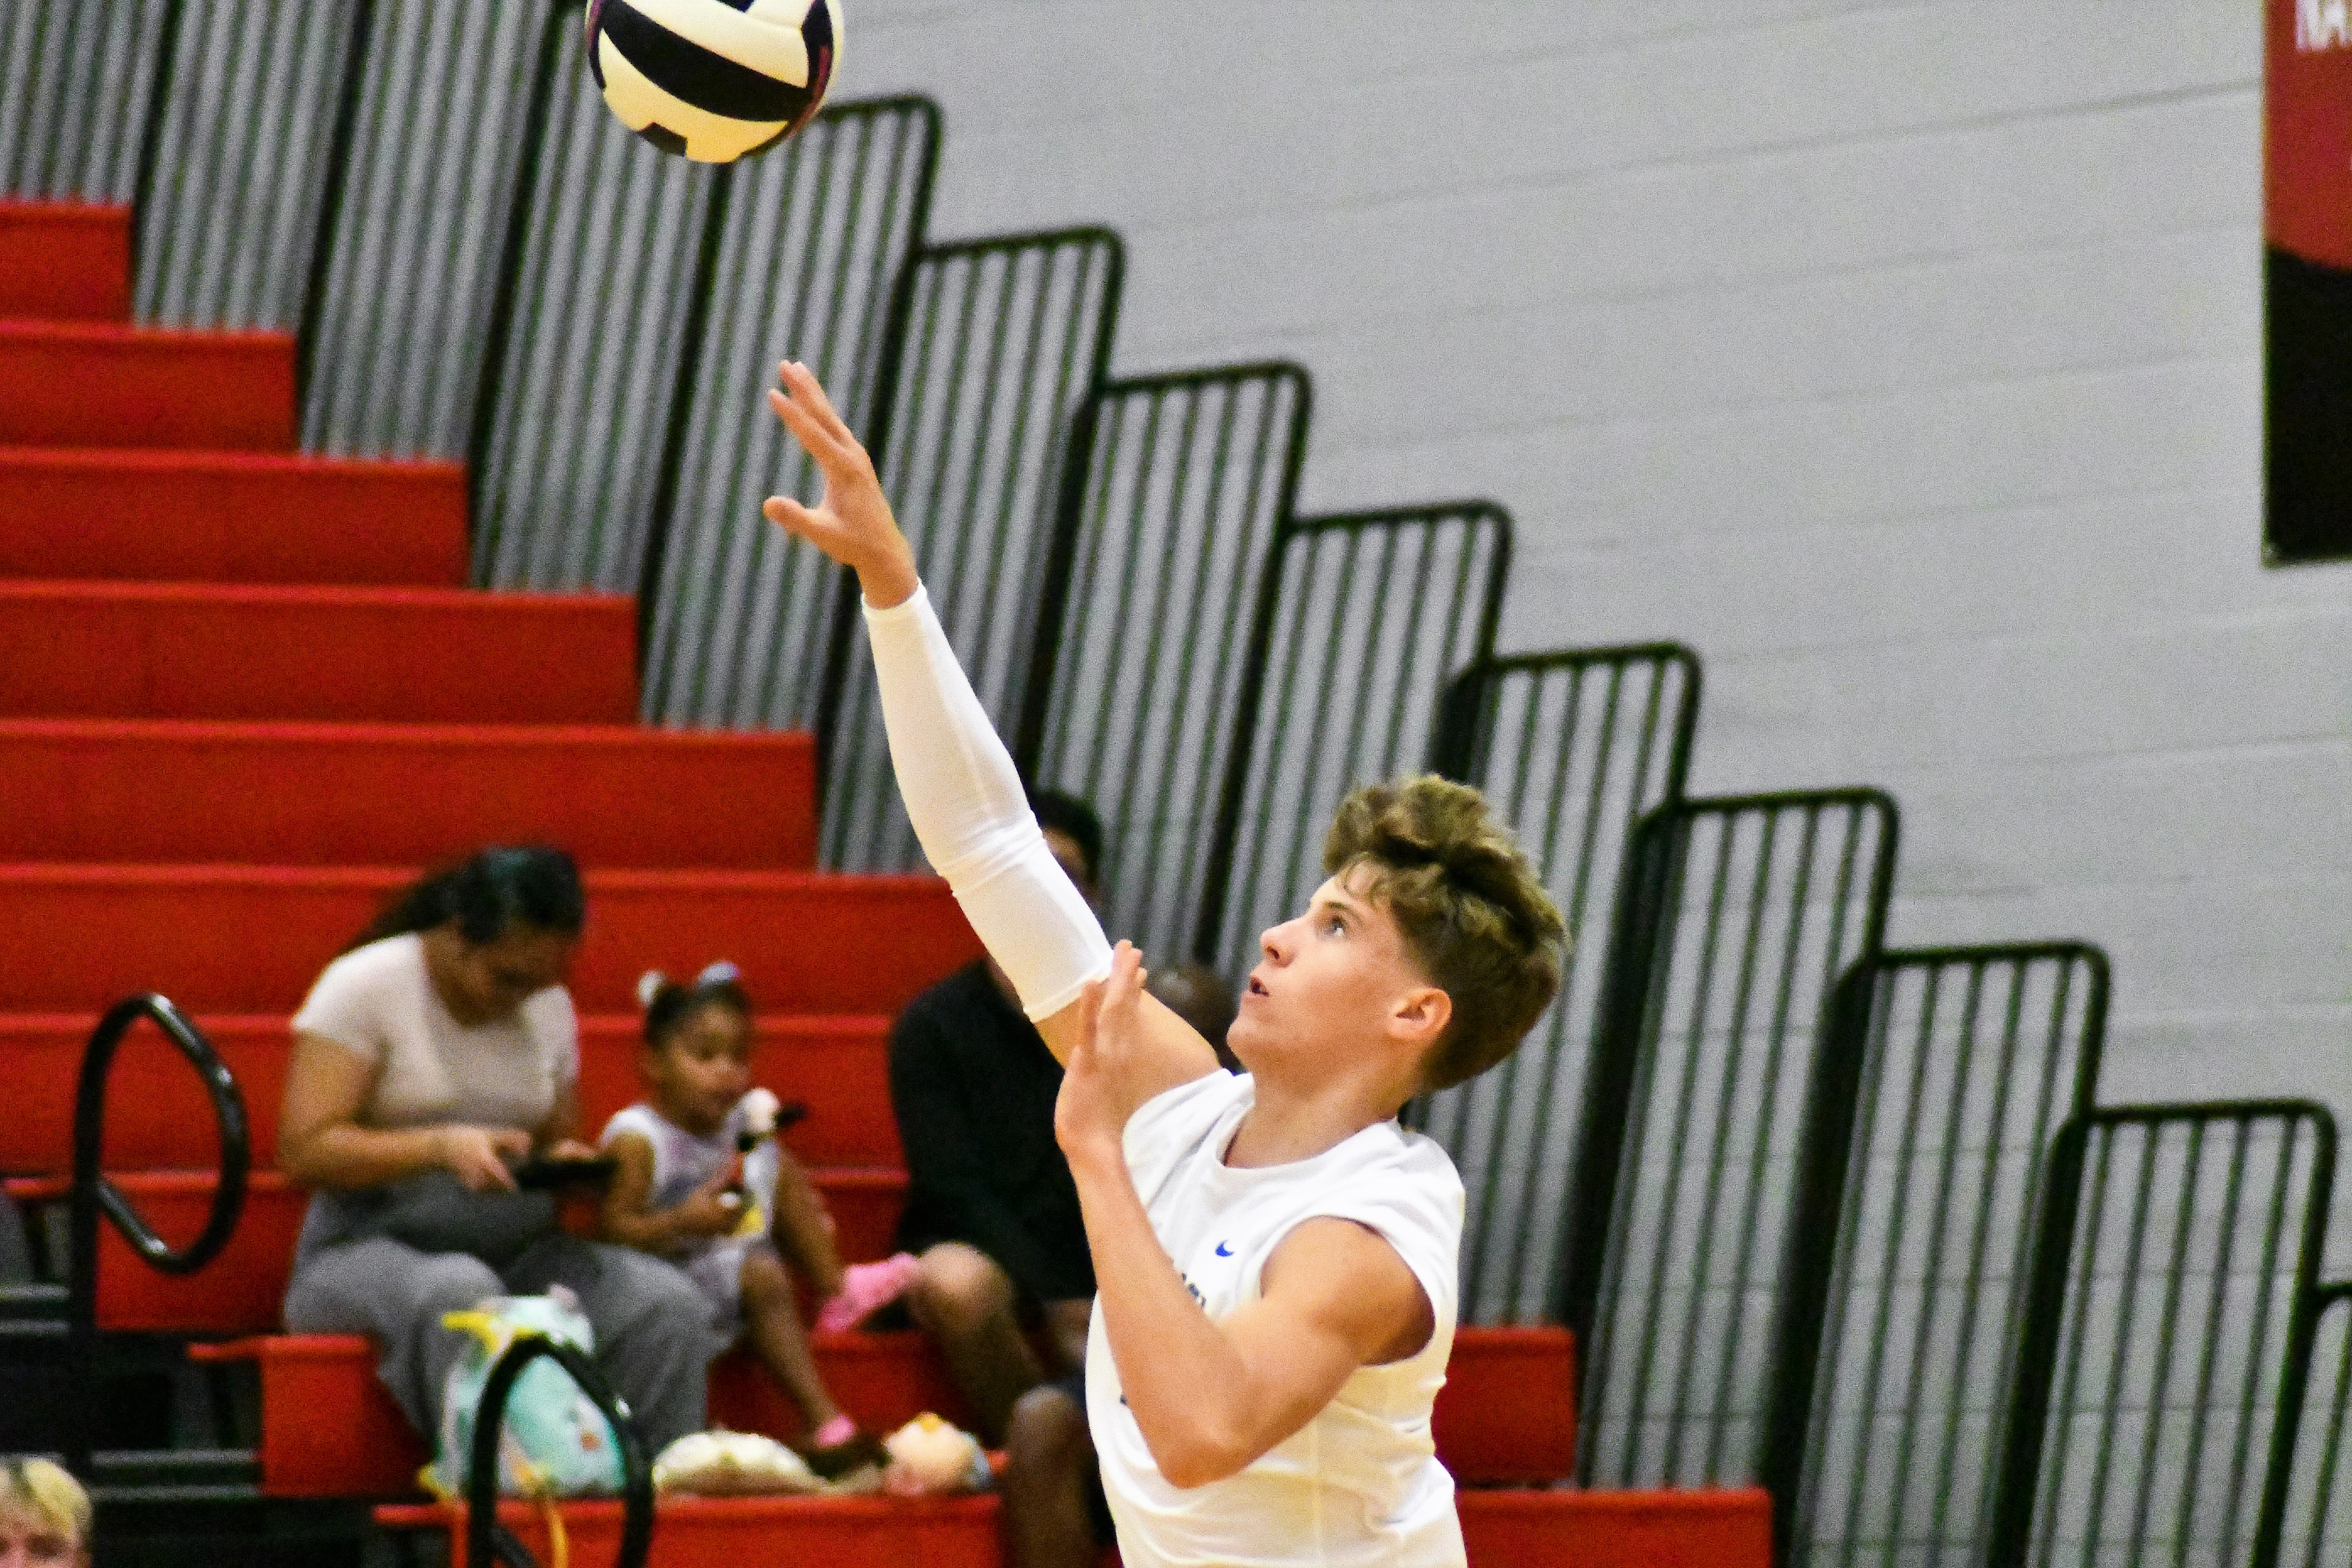 Boys’ volleyball serves up some history at all three schools